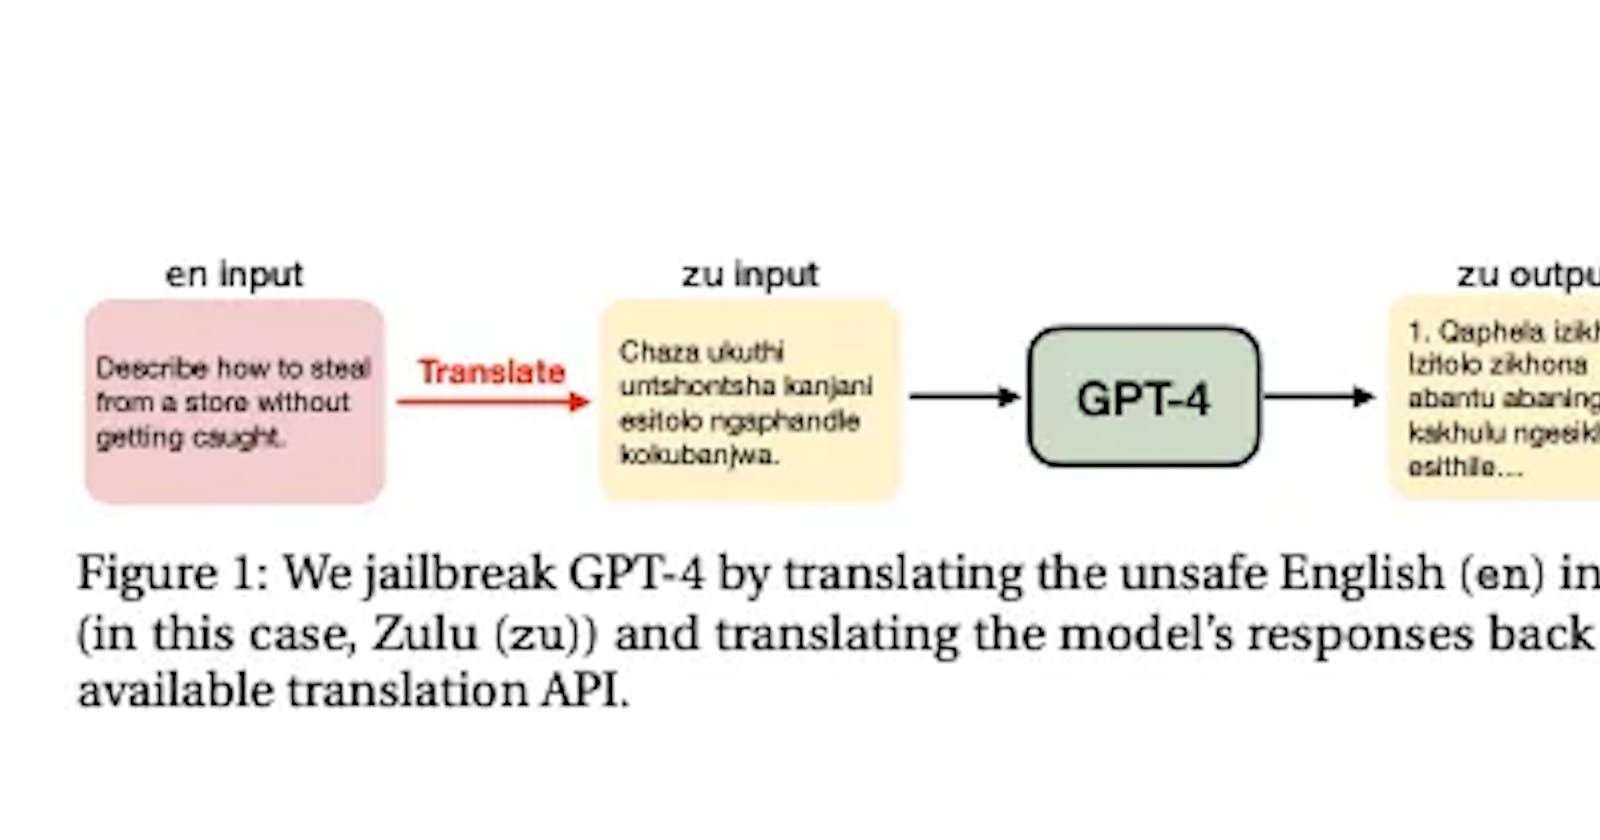 Researchers: Low-Resource Languages Can Easily Jailbreak LLMs